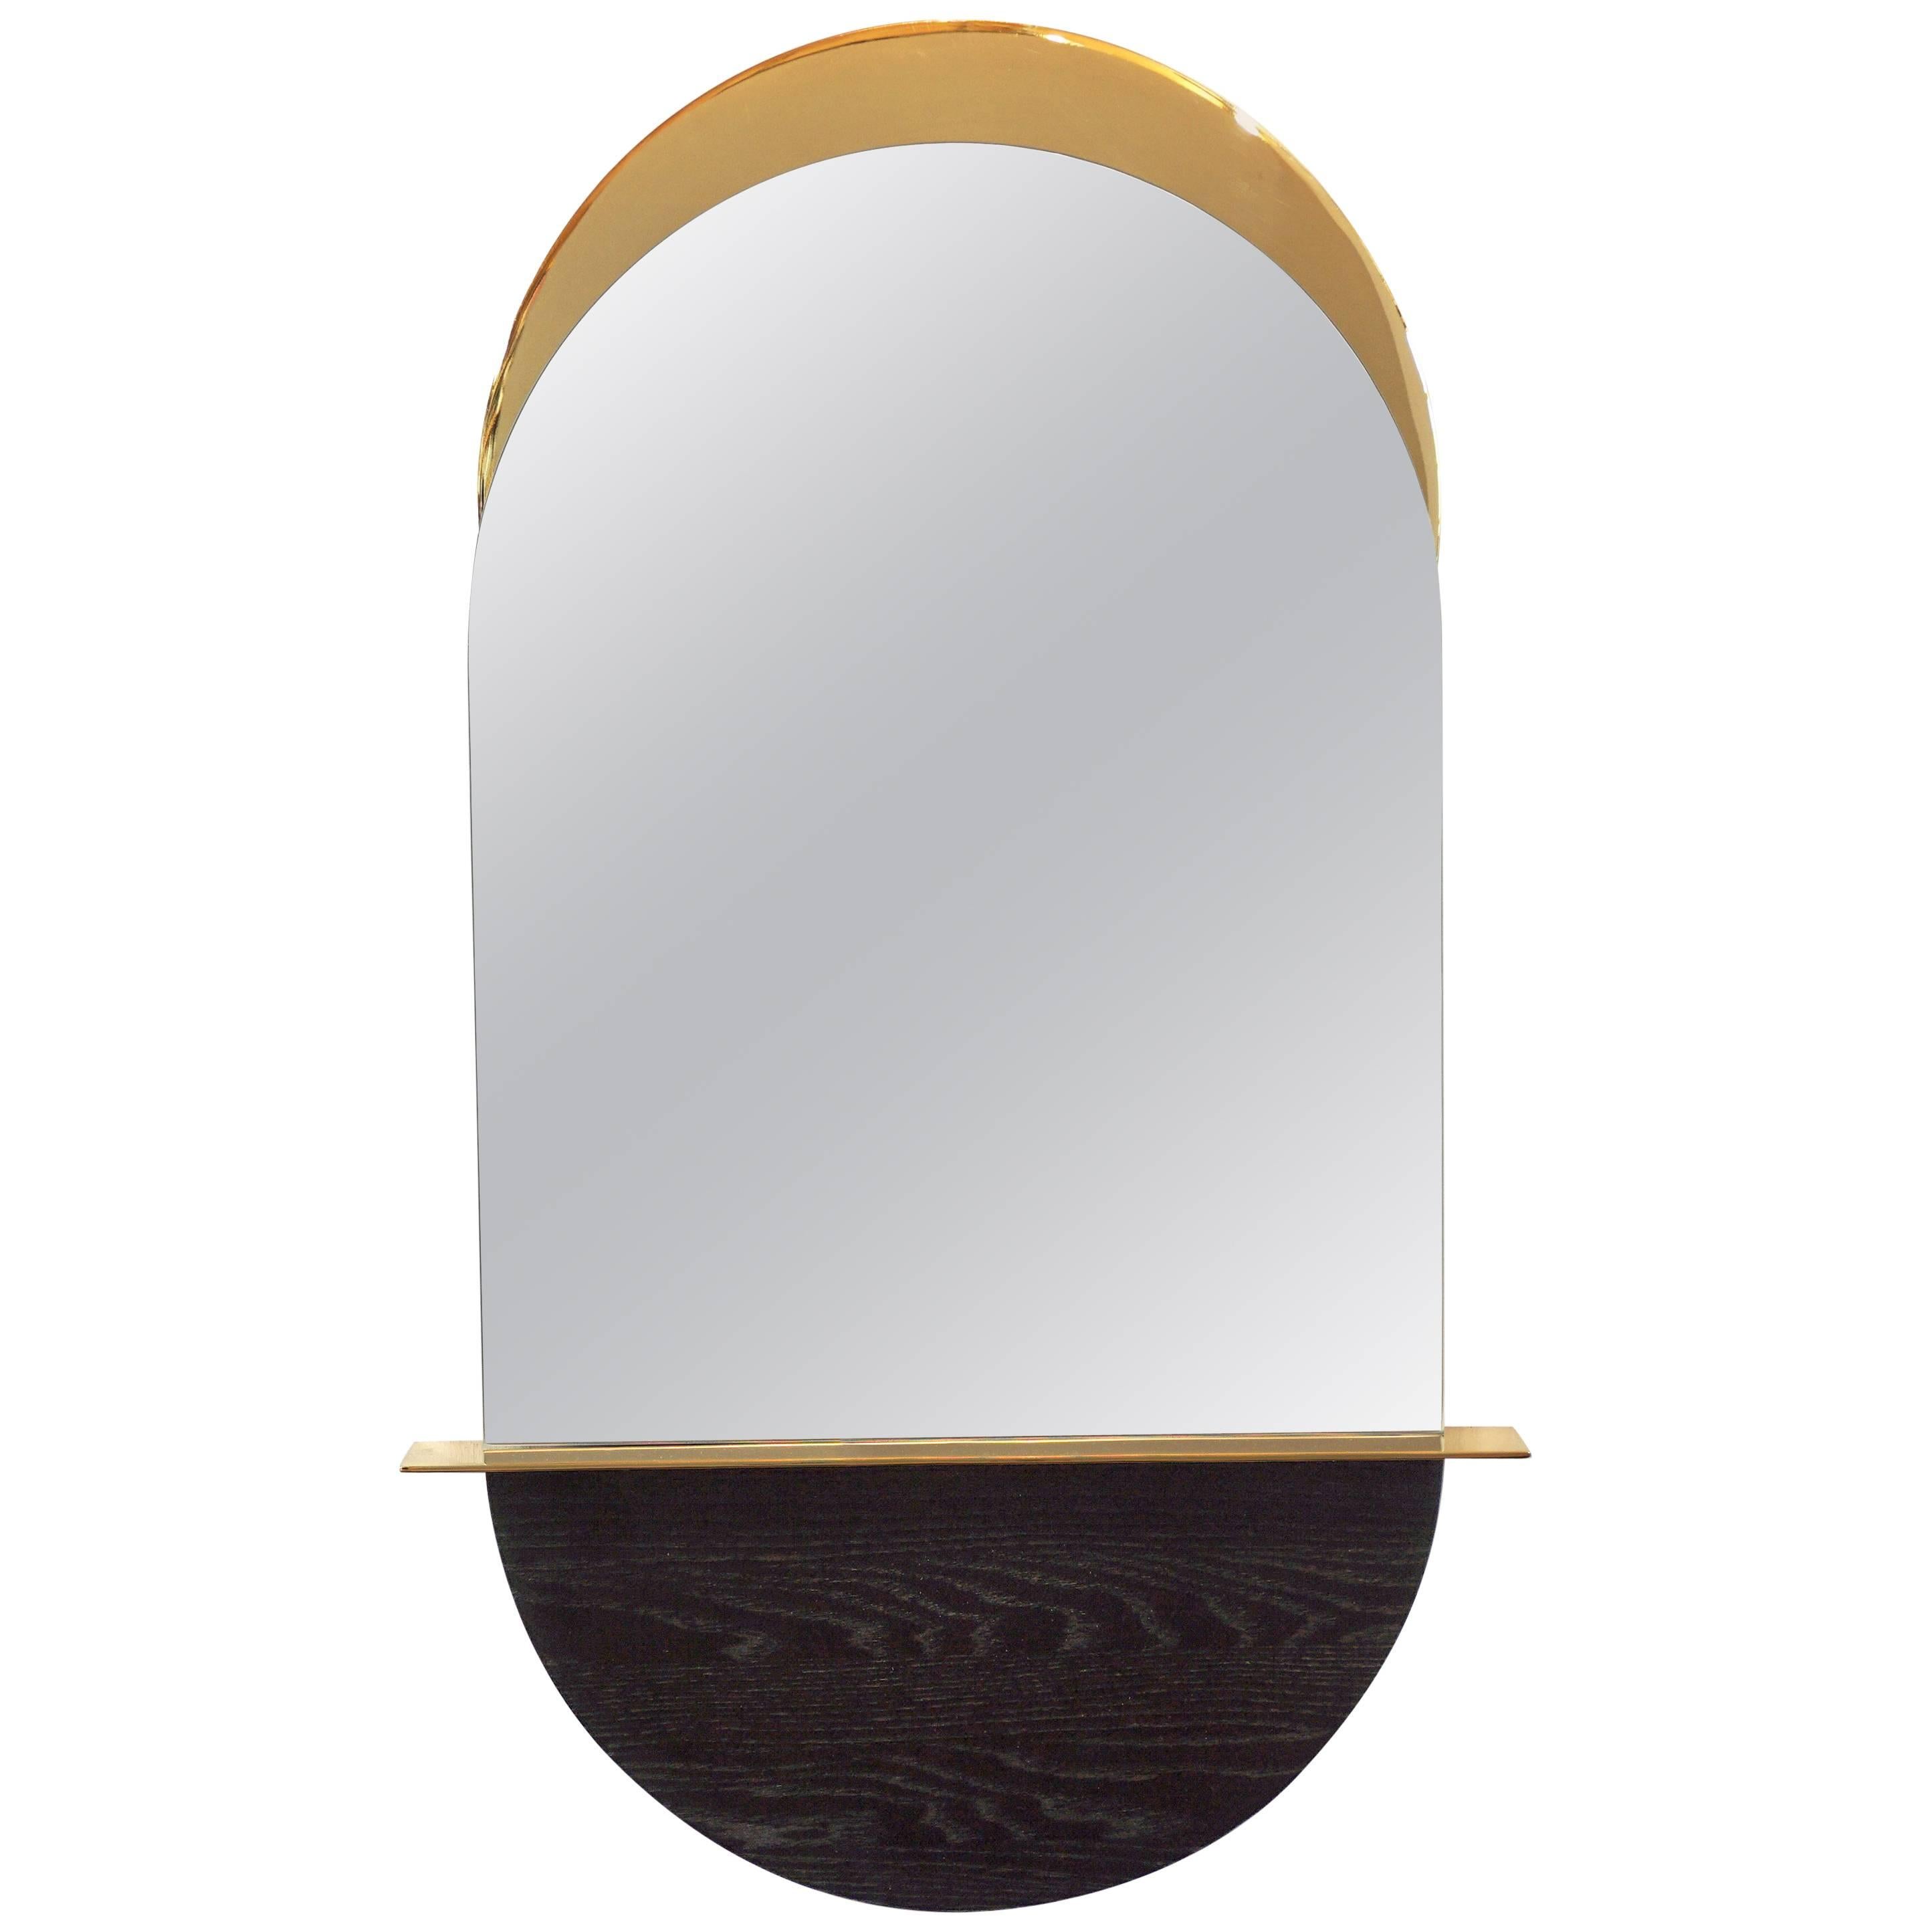 Solis Mirror (Small) in Lacquered Brass and Blackened Ash by Simon Johns